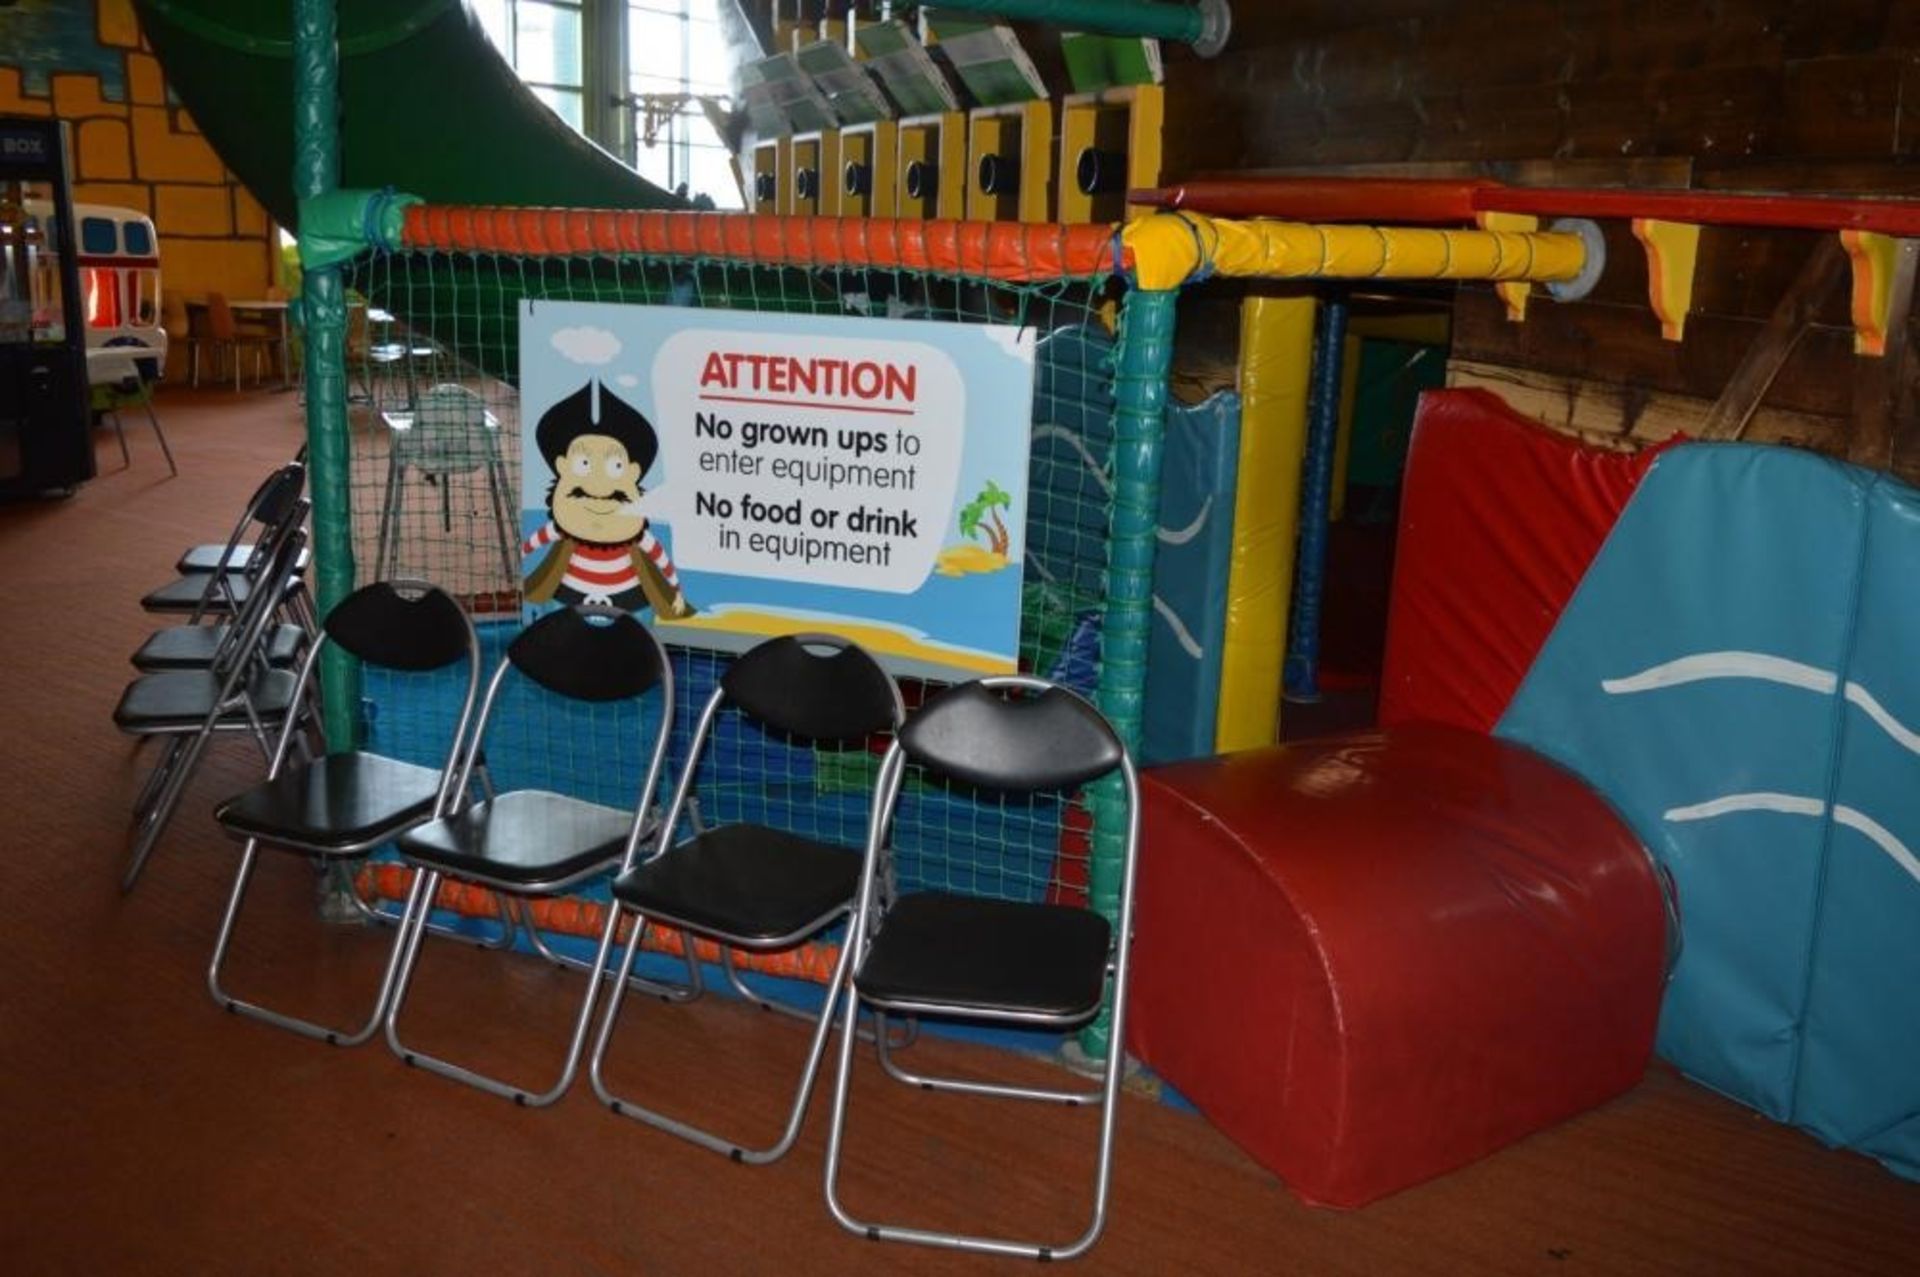 Botany Bay Puddletown Pirates Play Centre - The Only Pirate Themed Play Centre in the North West - F - Image 25 of 30